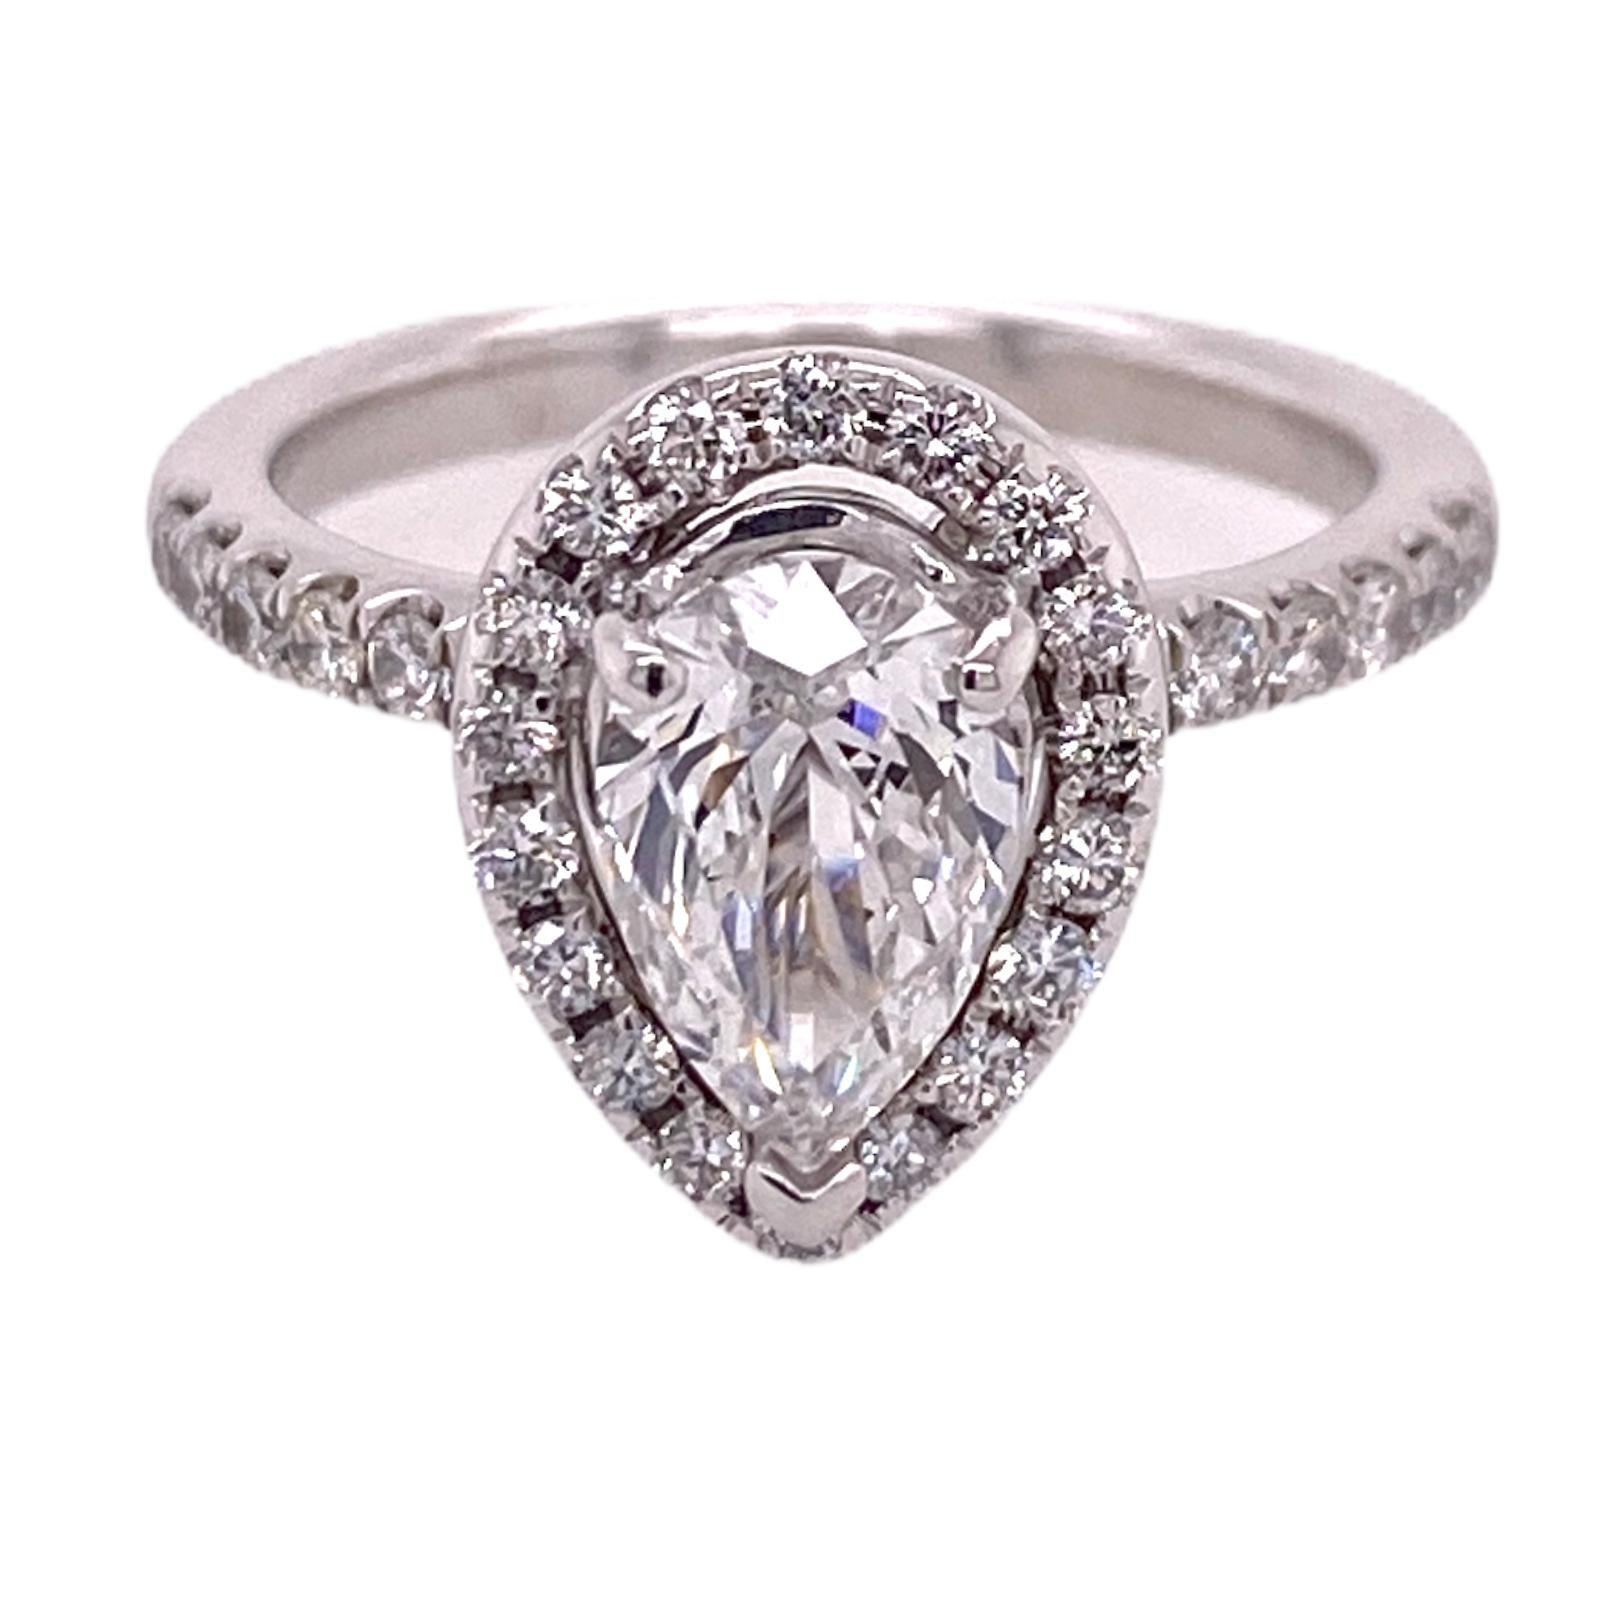 Beautiful pear cut diamond halo engagement ring fashioned in 14 karat white gold. The pear cut diamond weighs 1.20 carats and is graded F color and SI2 clarity by the GIA. The pear is surrounded by a diamond halo featuring 32 round brilliant cut